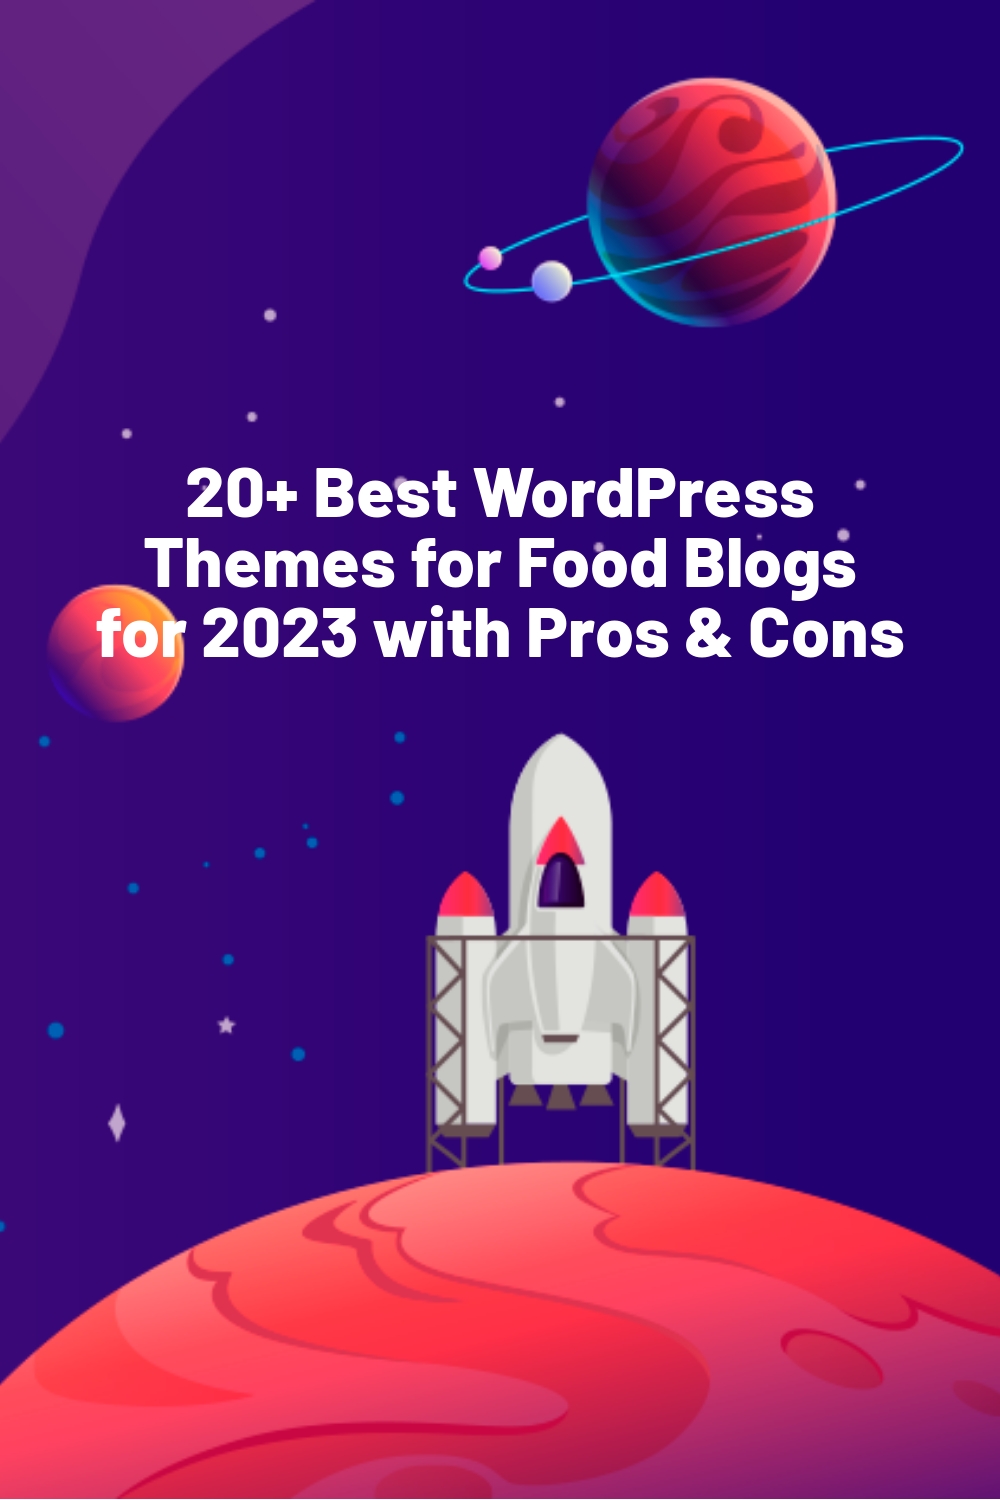 20+ Best WordPress Themes for Food Blogs for 2023 with Pros & Cons